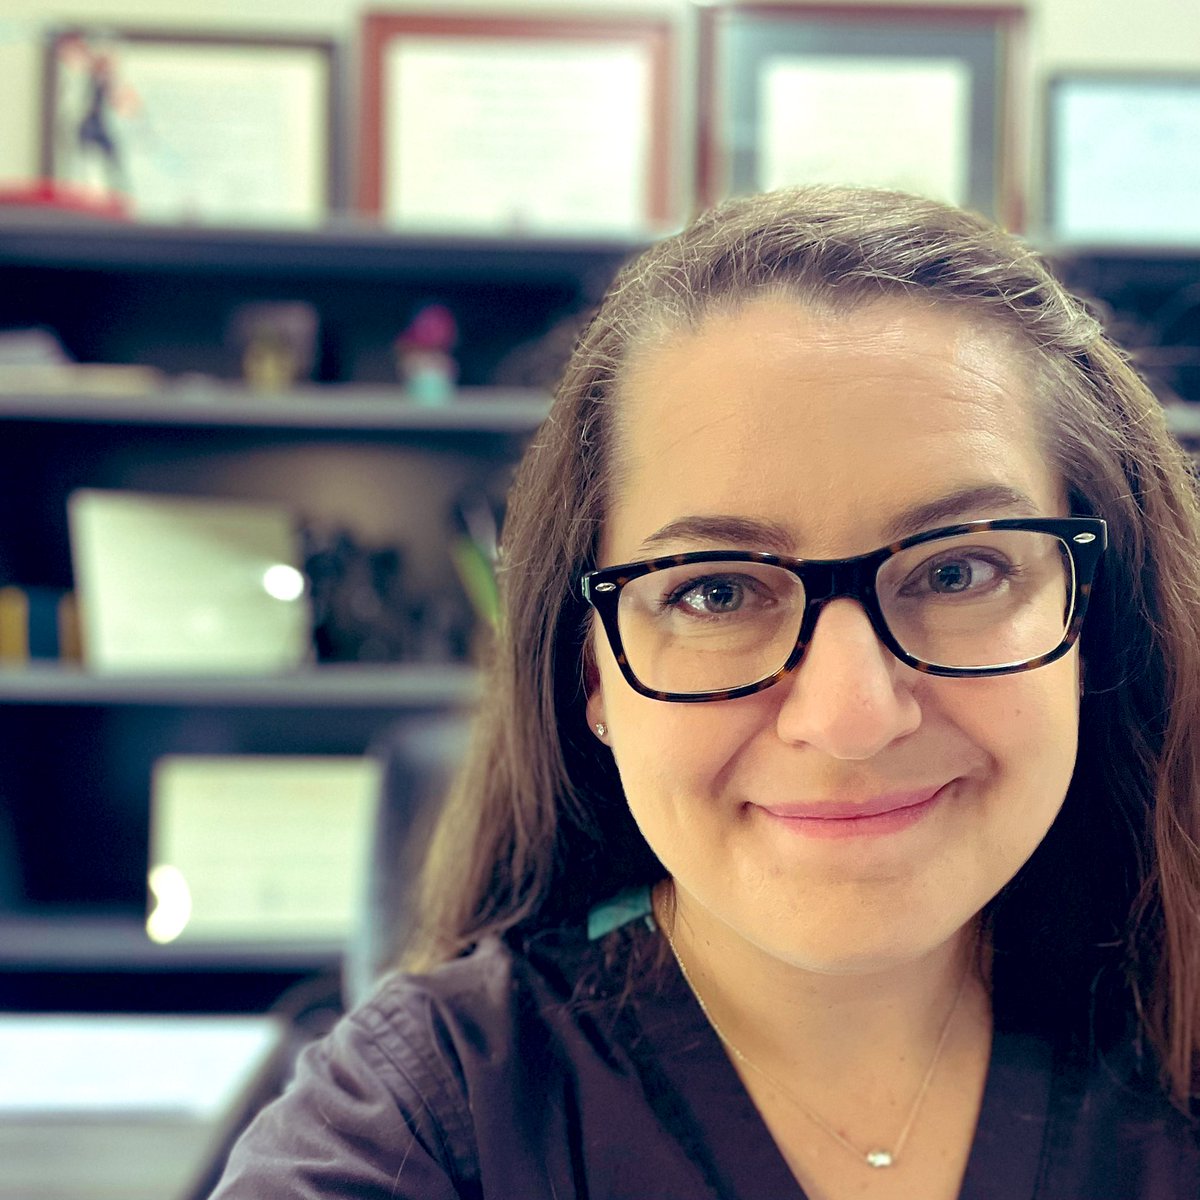 It’s official, in the fall I’ll be promoted to associate professor of medicine at @McGovernMed! Thank you so much to everyone who has supported me along the way. It’s been really great connecting with everyone involved w/ #NephTwitter & beyond!
#NephForward 🧡
#WomenInNephrology